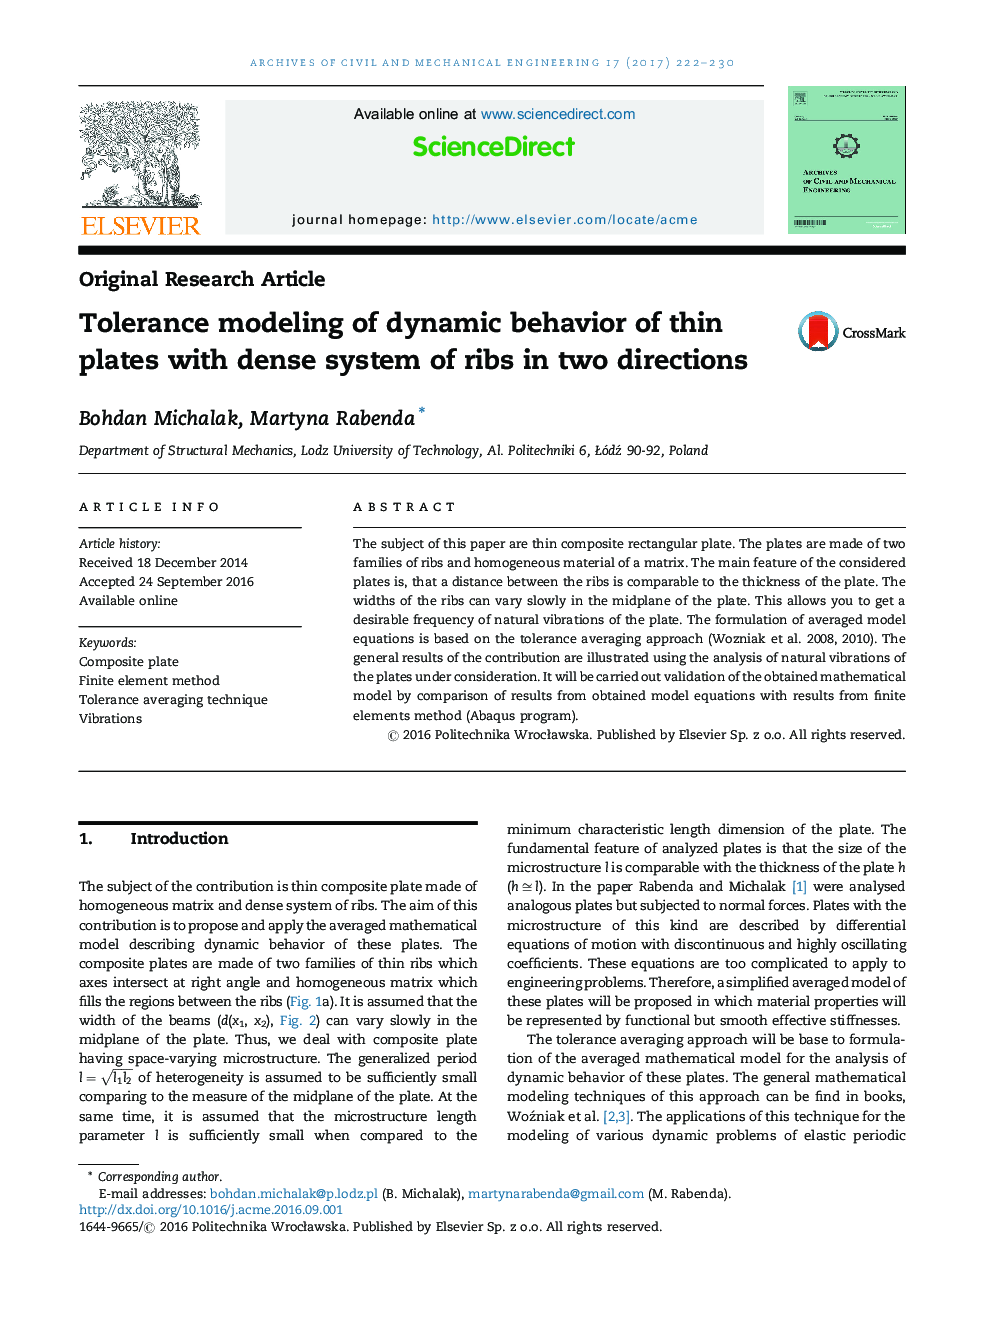 Tolerance modeling of dynamic behavior of thin plates with dense system of ribs in two directions